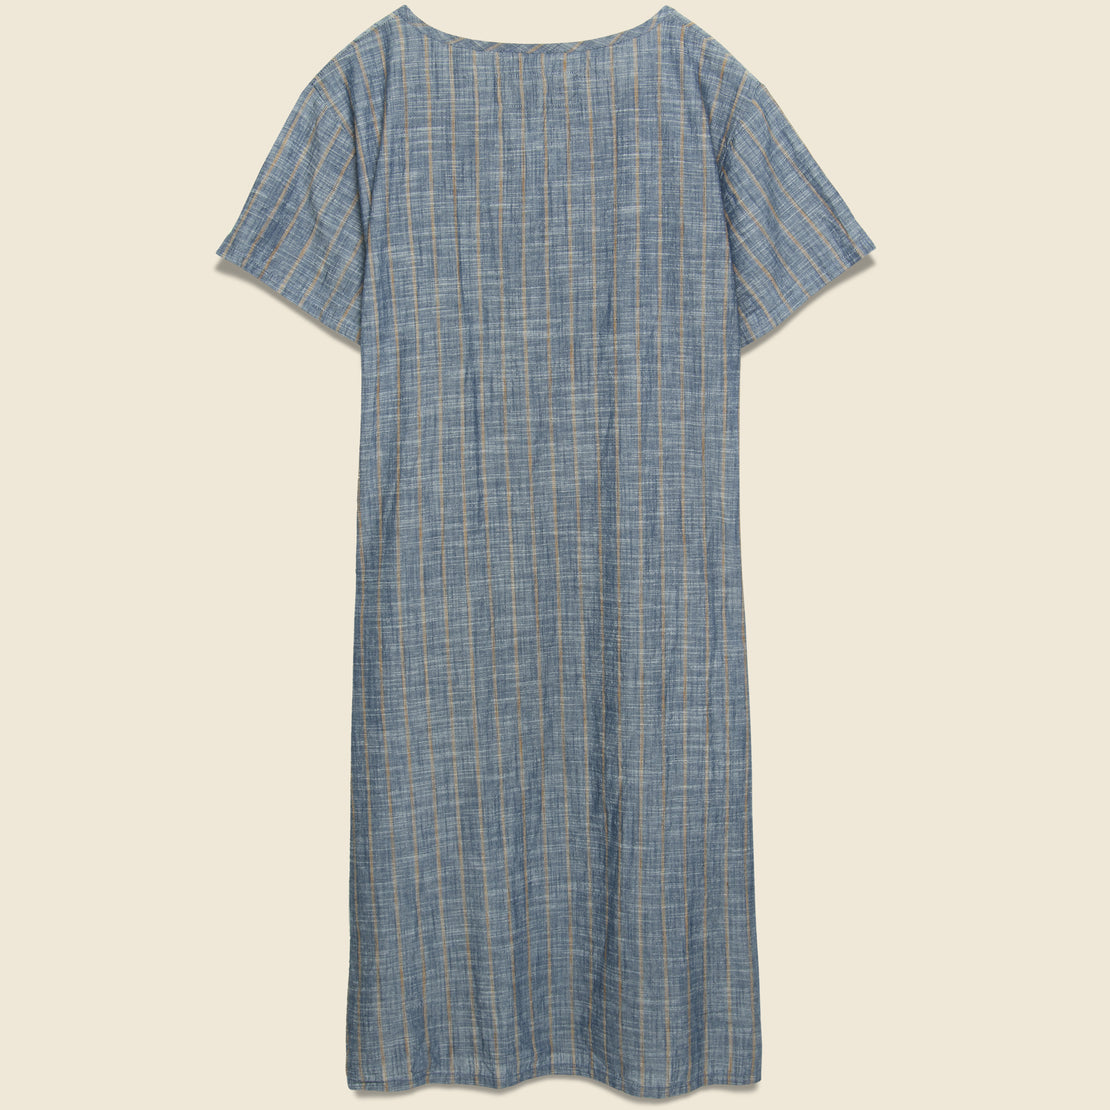 Striped Playa Dress - Charcoal - Mollusk - STAG Provisions - W - Onepiece - Dress